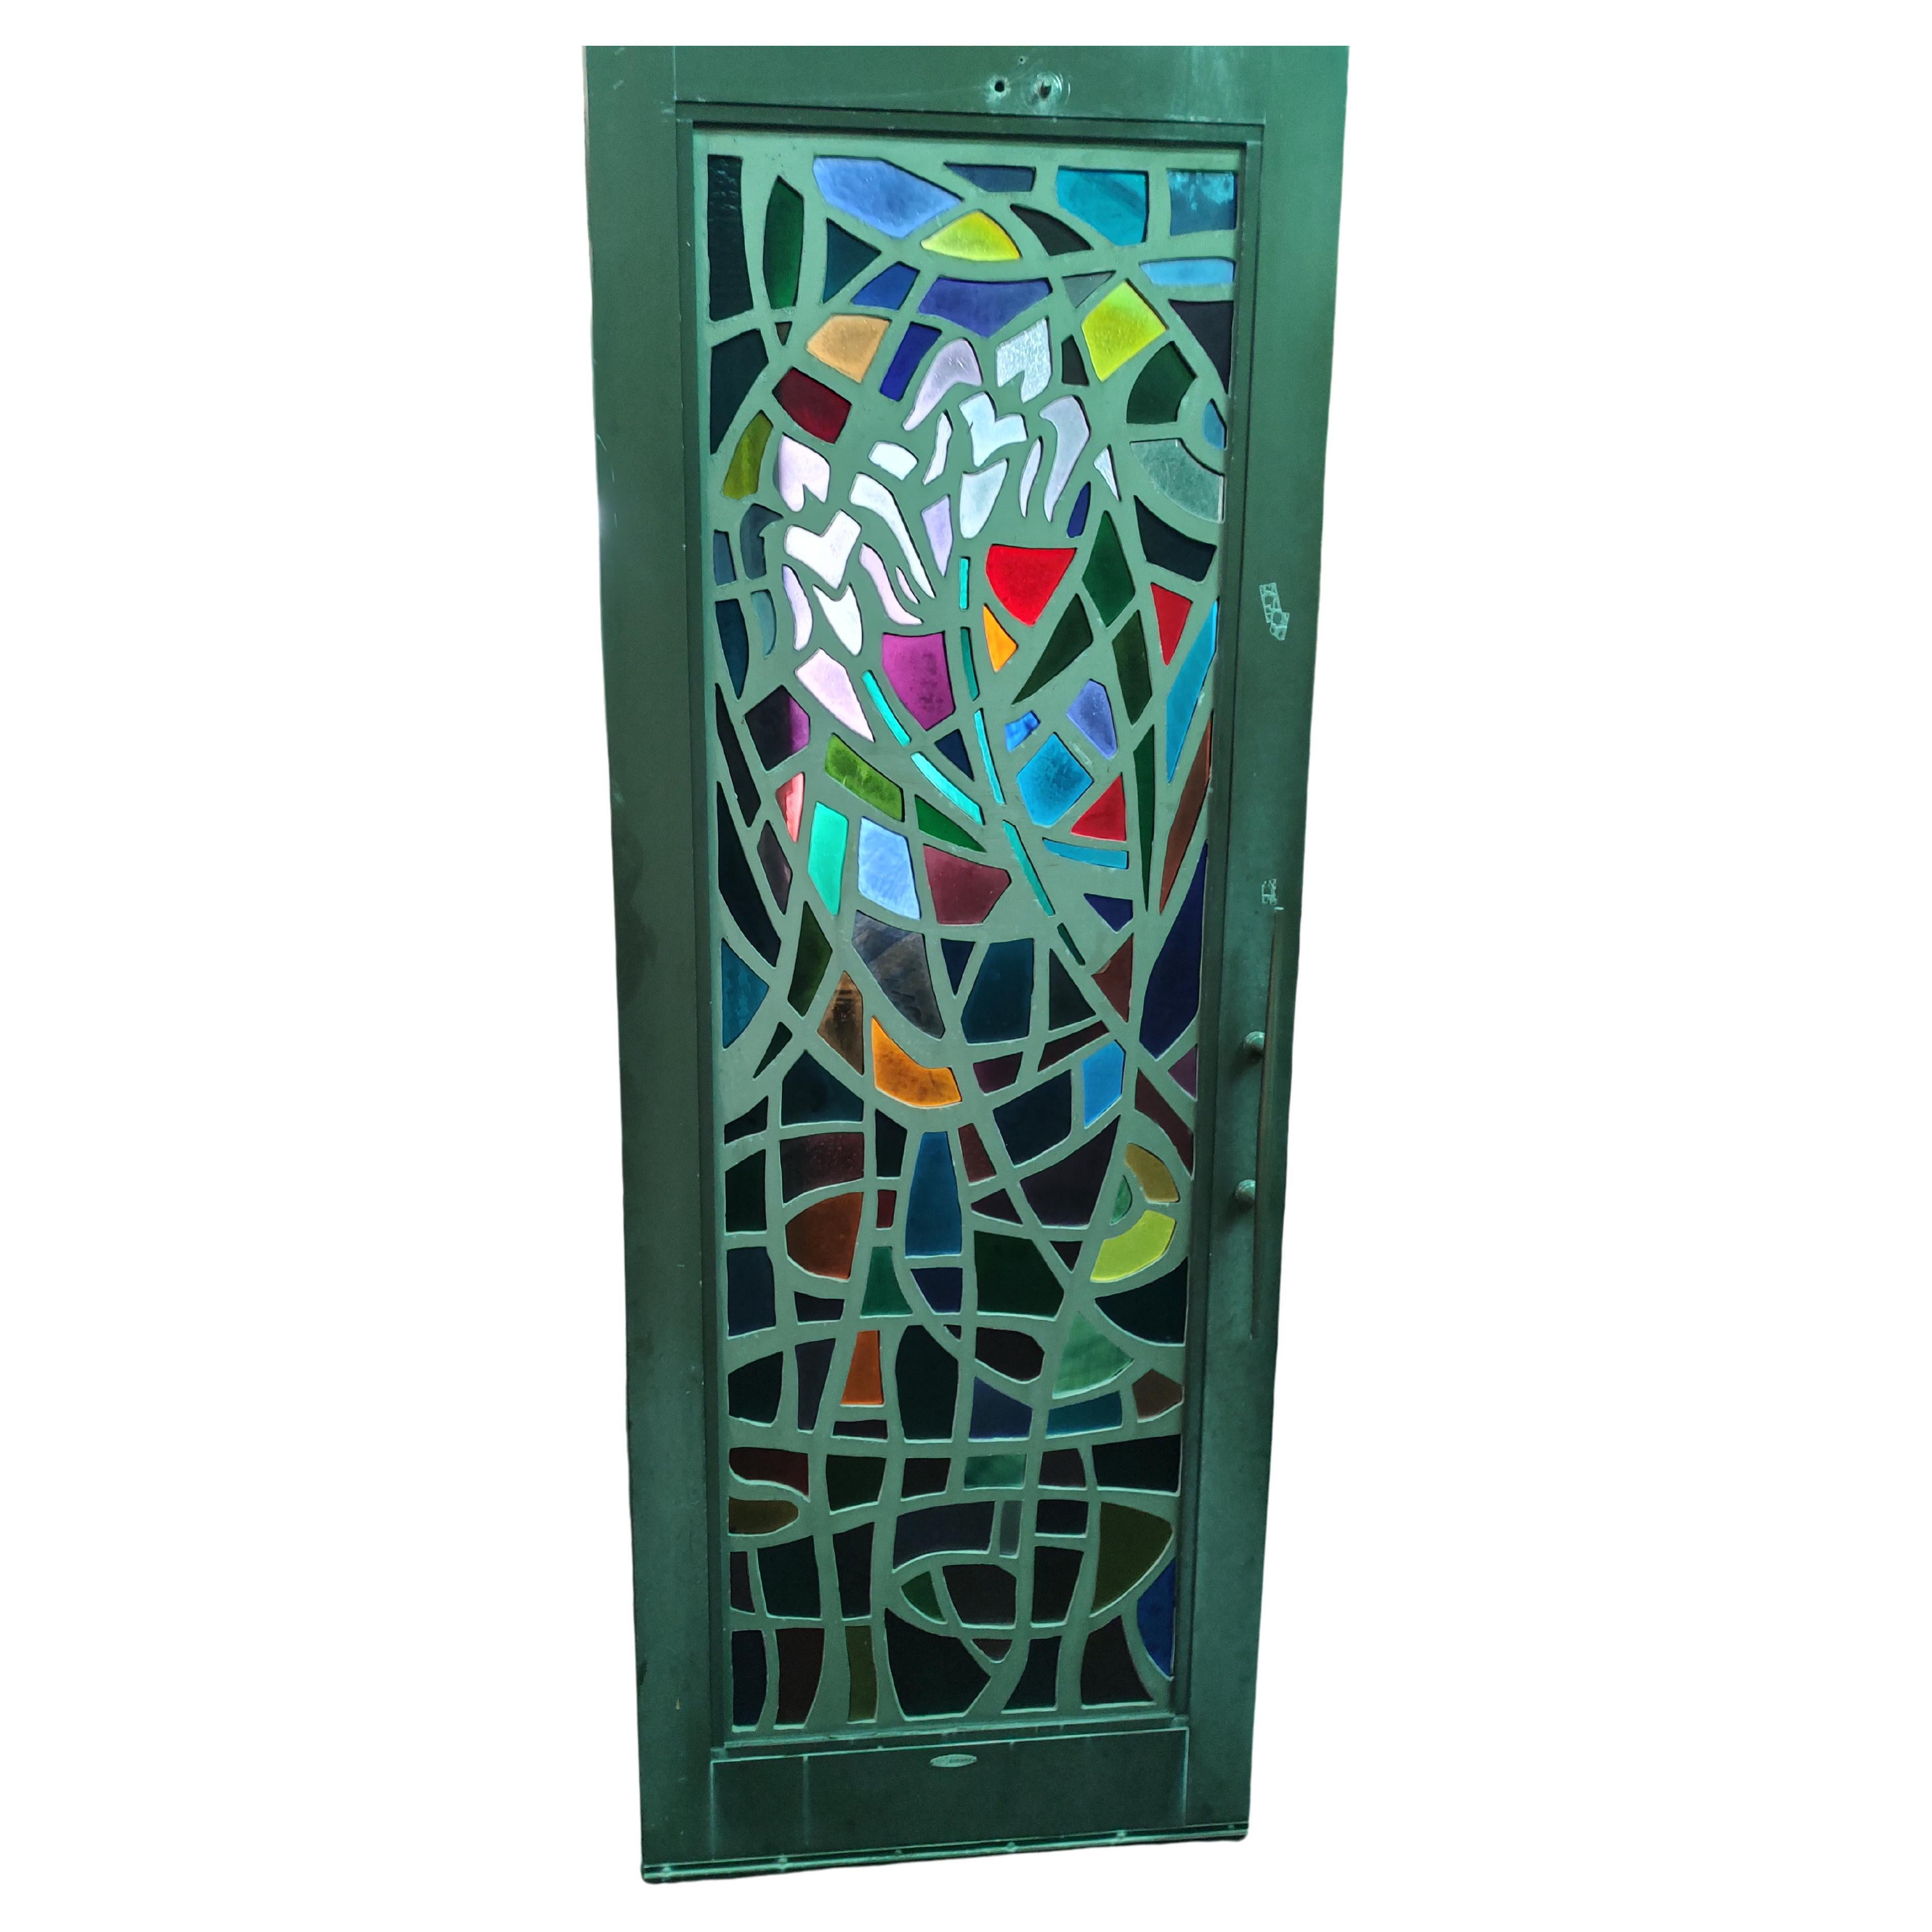 Extremely Rare set of 10 steel doors with individual and different stained glass panels, which are 23.5 x 72. Door size is 30.5 x 84 x 2. Panels can be removed. So beautiful the color absolutely pops when the light shines thru. Each one has a